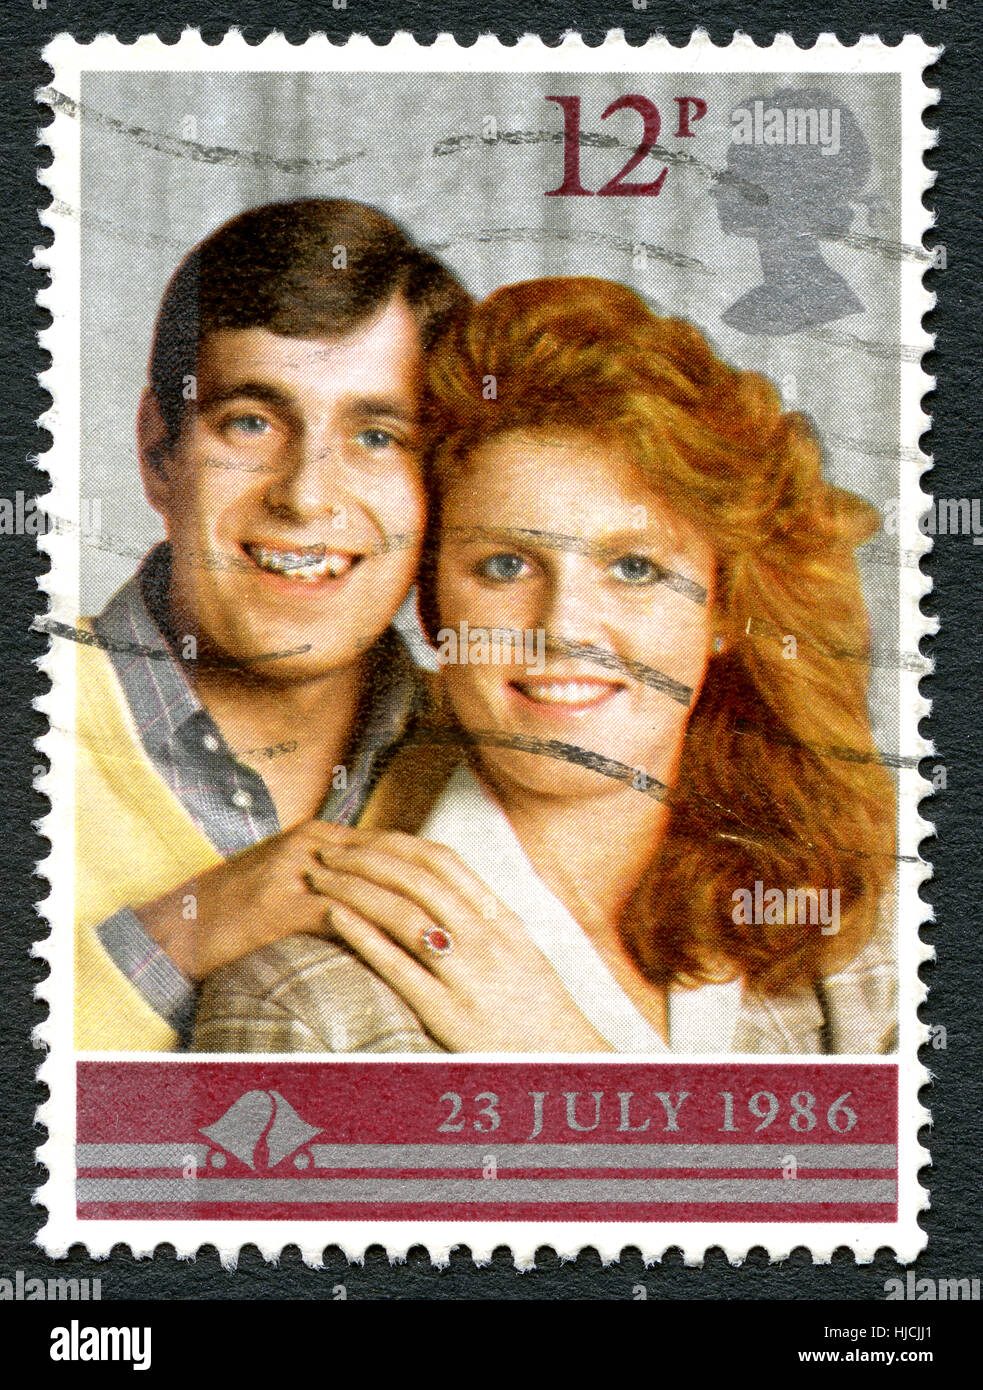 GREAT BRITAIN - CIRCA 1986: A used postage stamp from the UK, celebrating the Royal Wedding of Prince Andrew and Sarah Ferguson, circa 1986. Stock Photo